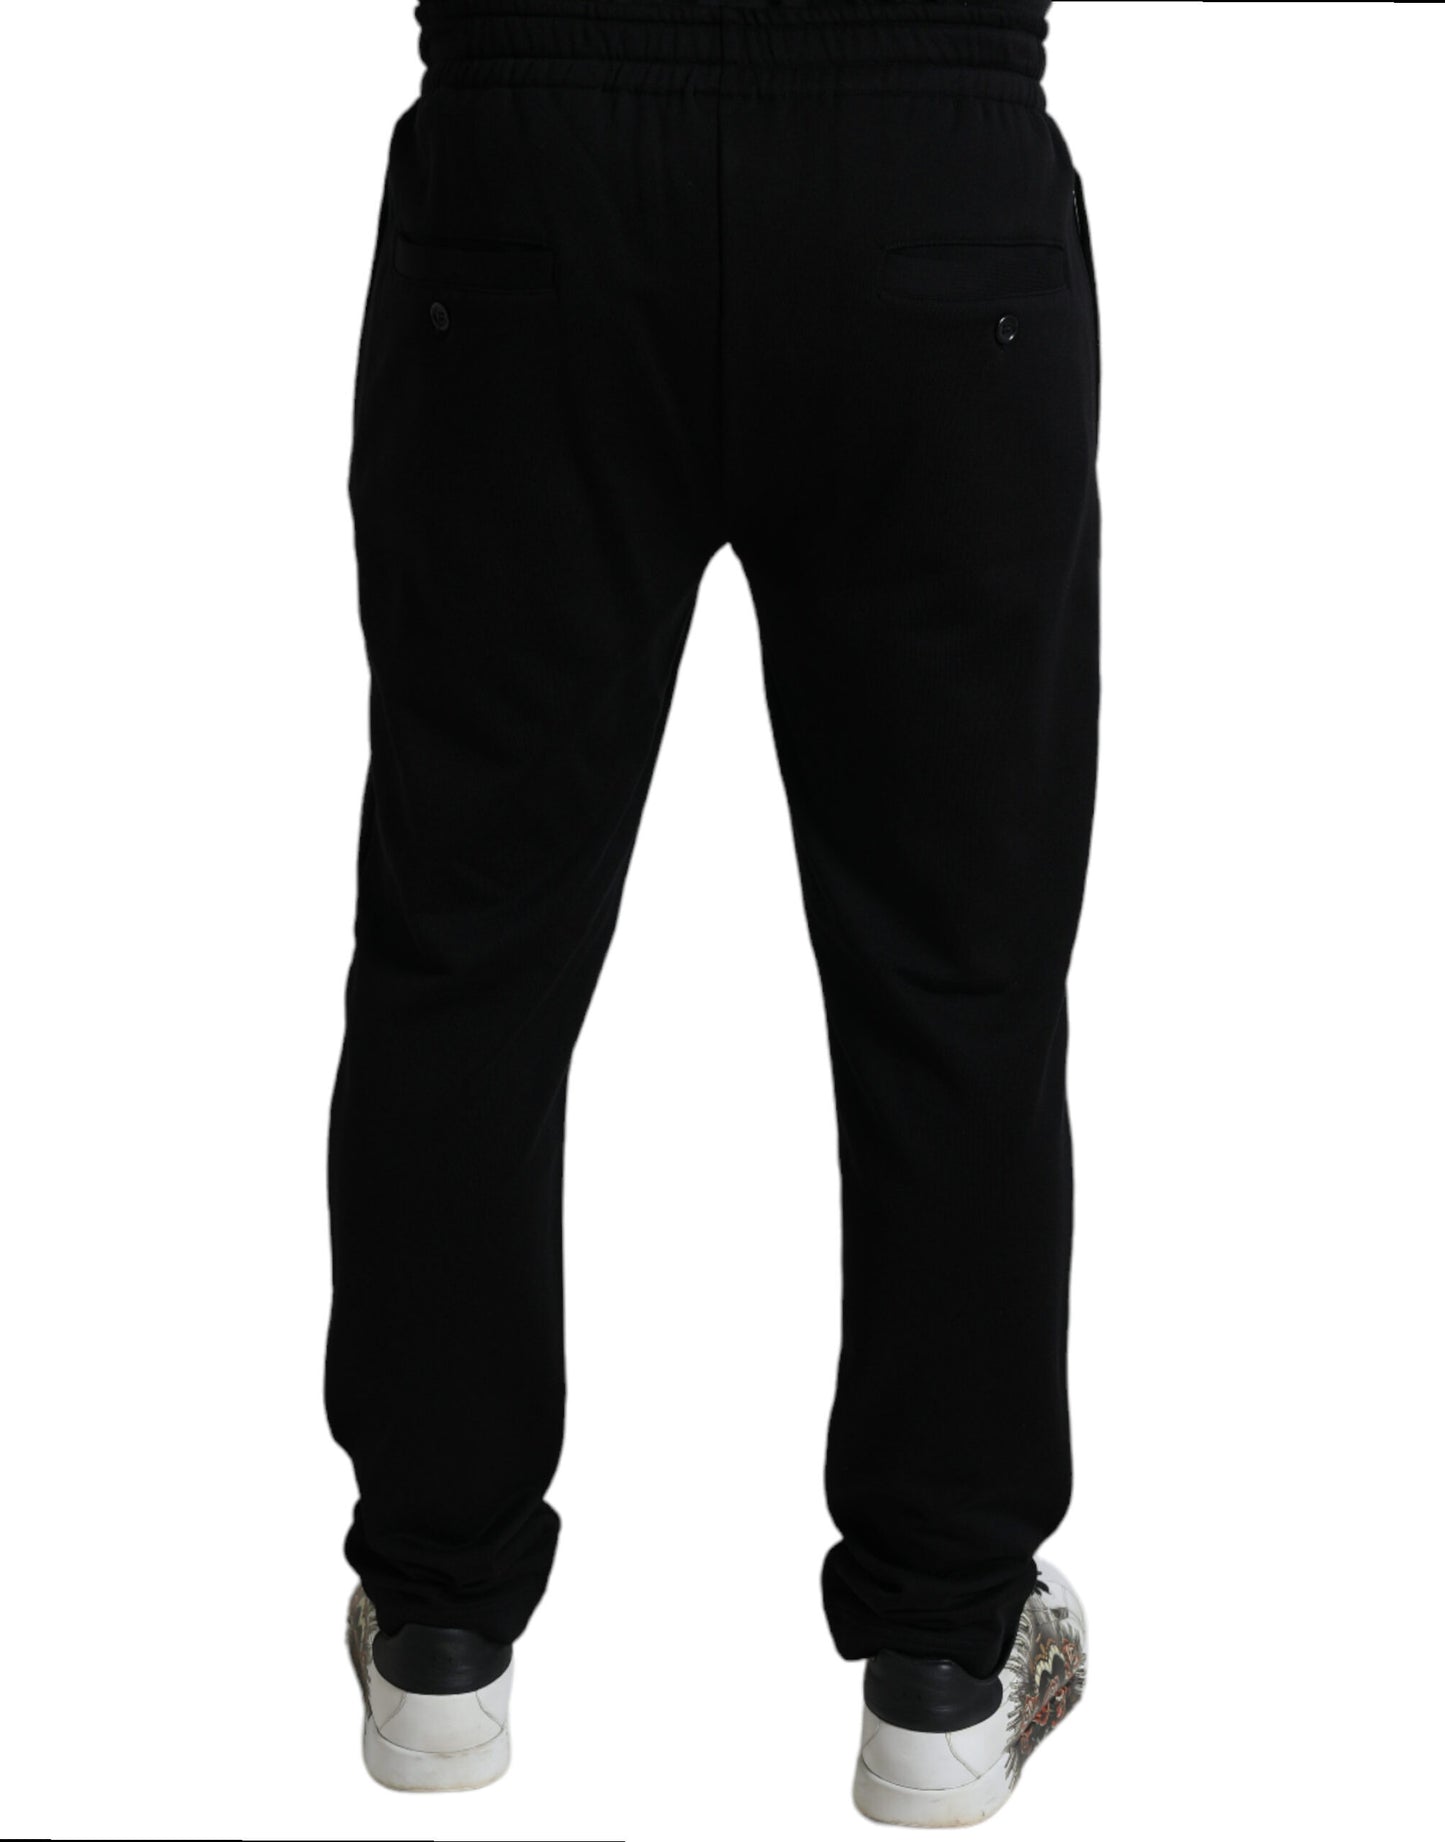 Elegant Black Cotton Joggers with Logo Embroidery